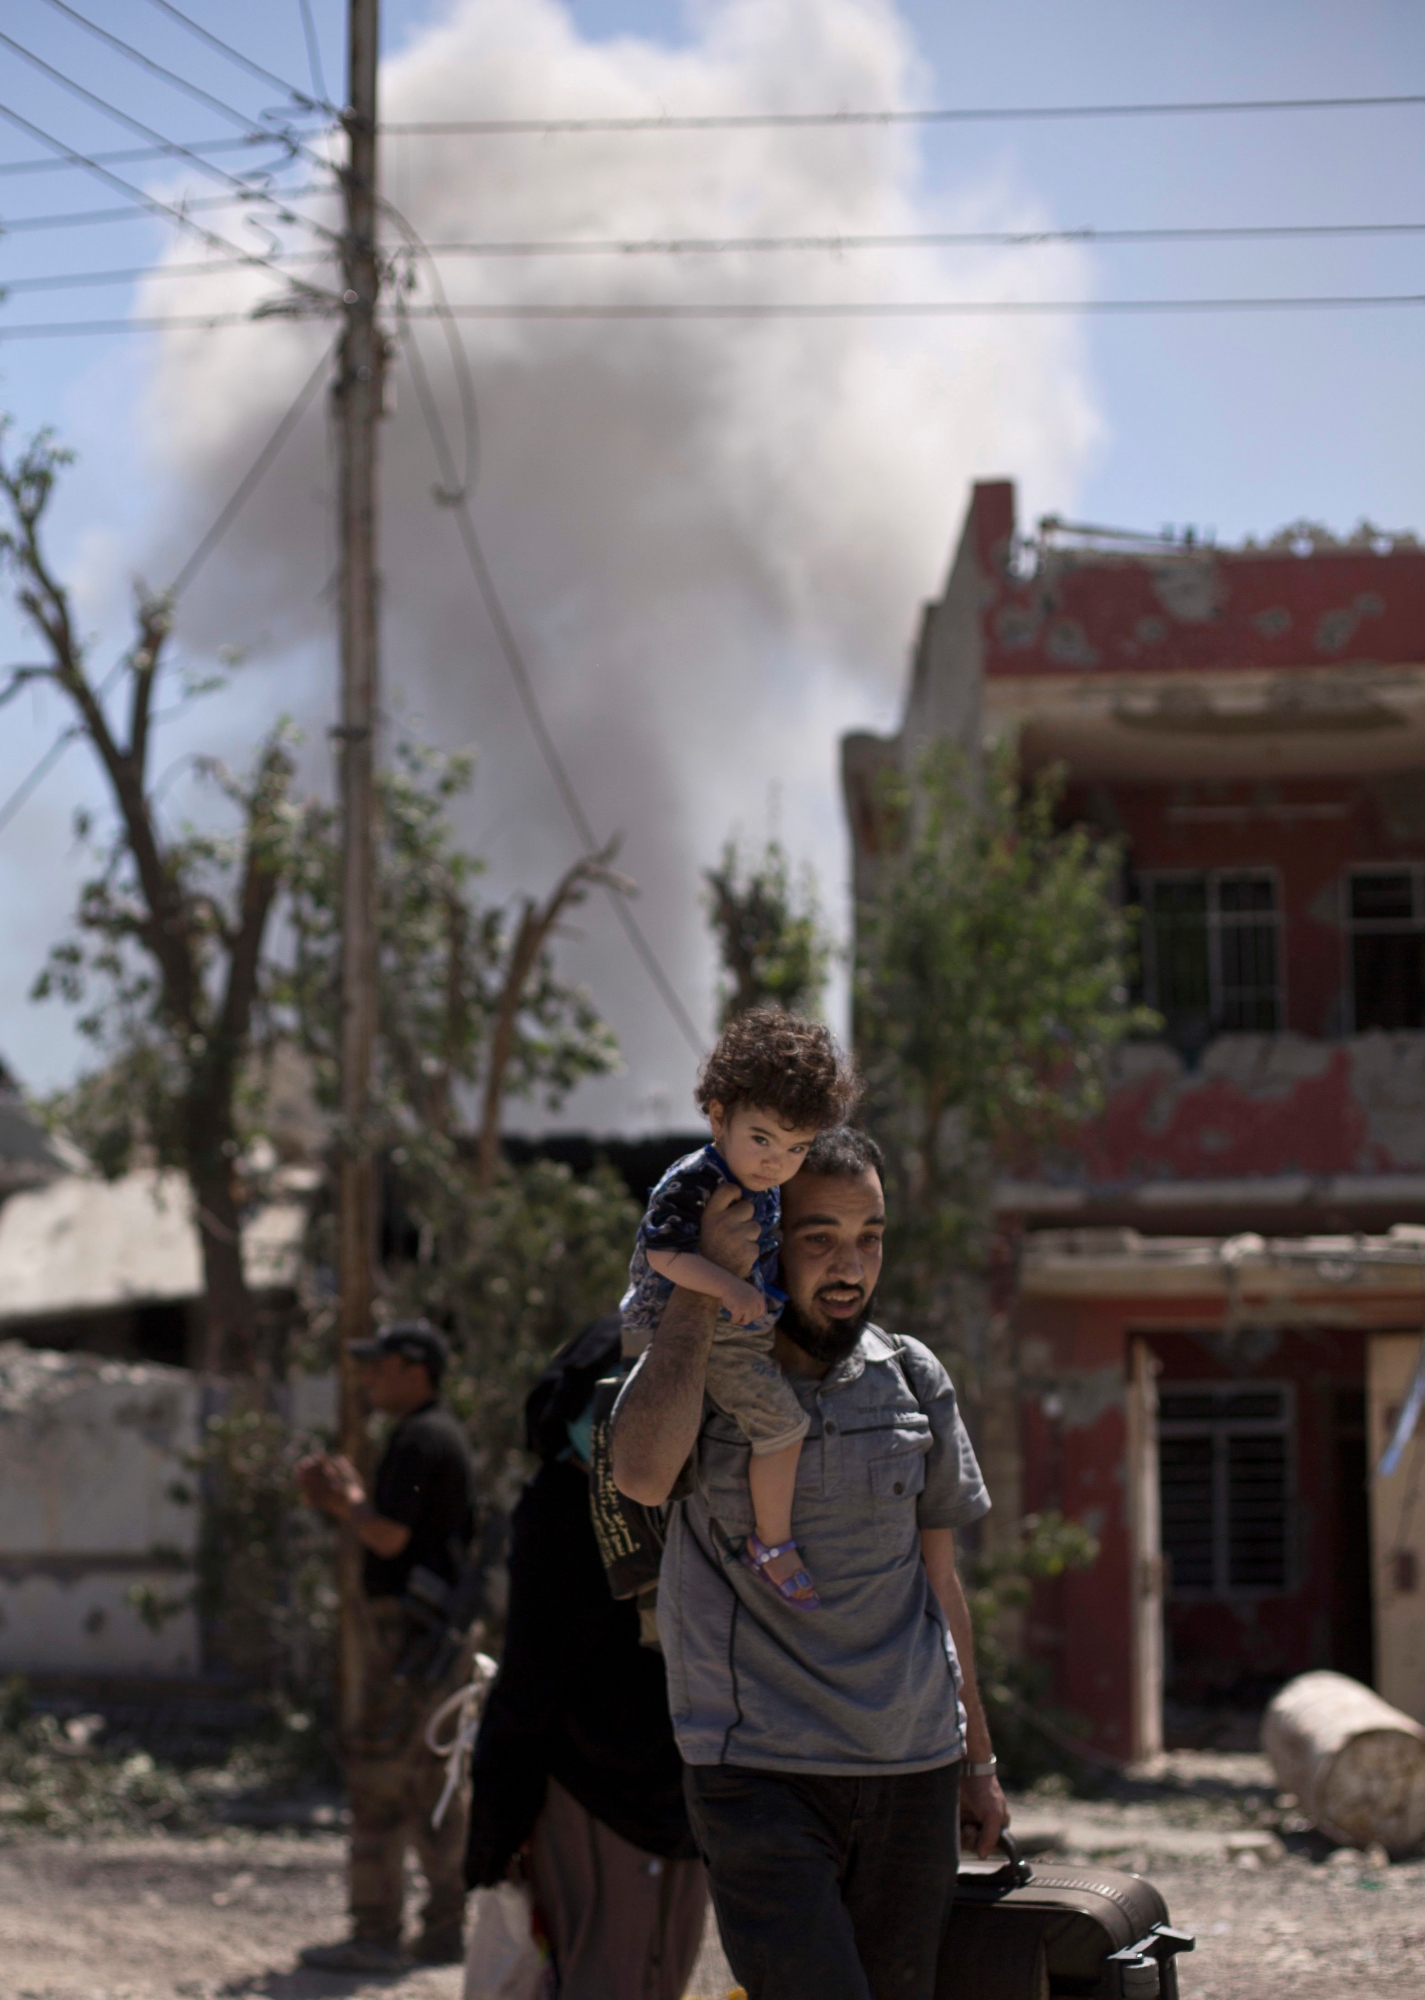 FILE - In this Wednesday, May 17, 2017 file photo, smoke from an airstrike rises as a man flees with a toddler during fighting between Iraqi special forces and Islamic State militants, in the al-Rifai neighborhood of western Mosul, Iraq. In Mosul, Iraqi forces are steadily closing in on remaining pockets of territory held by IS, but unlike past urban battles against them in Iraq, the militants still hunkered down in the city are mounting a stiff resistance, and the more the battle stretches out, the greater the risk for civilians remaining behind. (AP Photo/Maya Alleruzzo, File) Iraq Mosul Siege